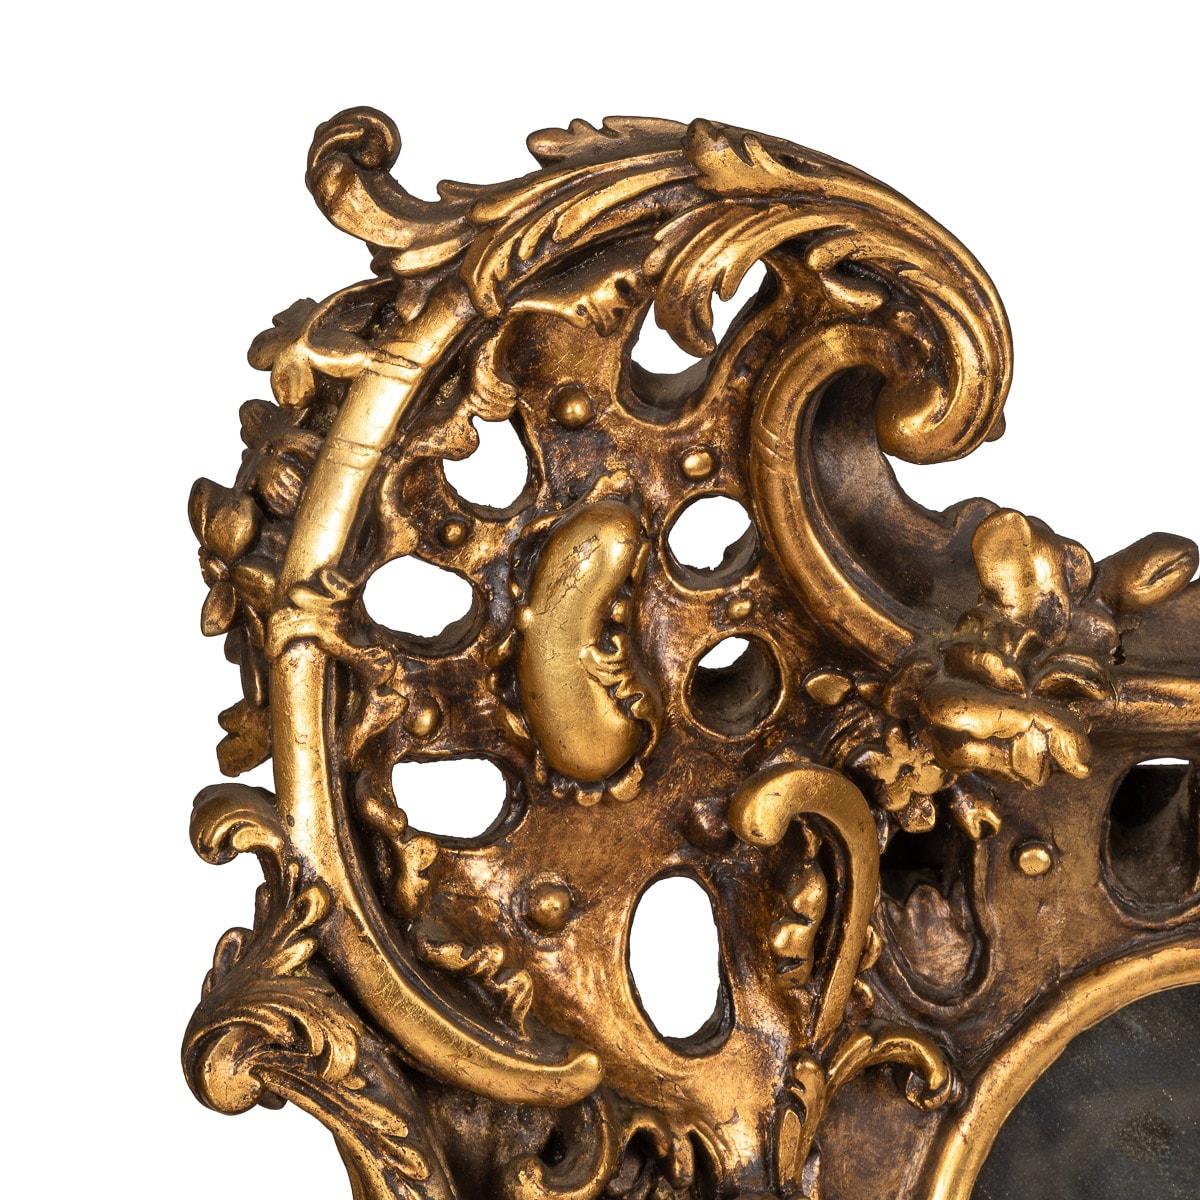 Antique 19th Century French Louis XV style mirror surrounded in an extravagant gilt wood Rococo style frame. Beautiful elaborate carvings including floral and scroll designs on matted ground.

CONDITION
In Great Condition - No